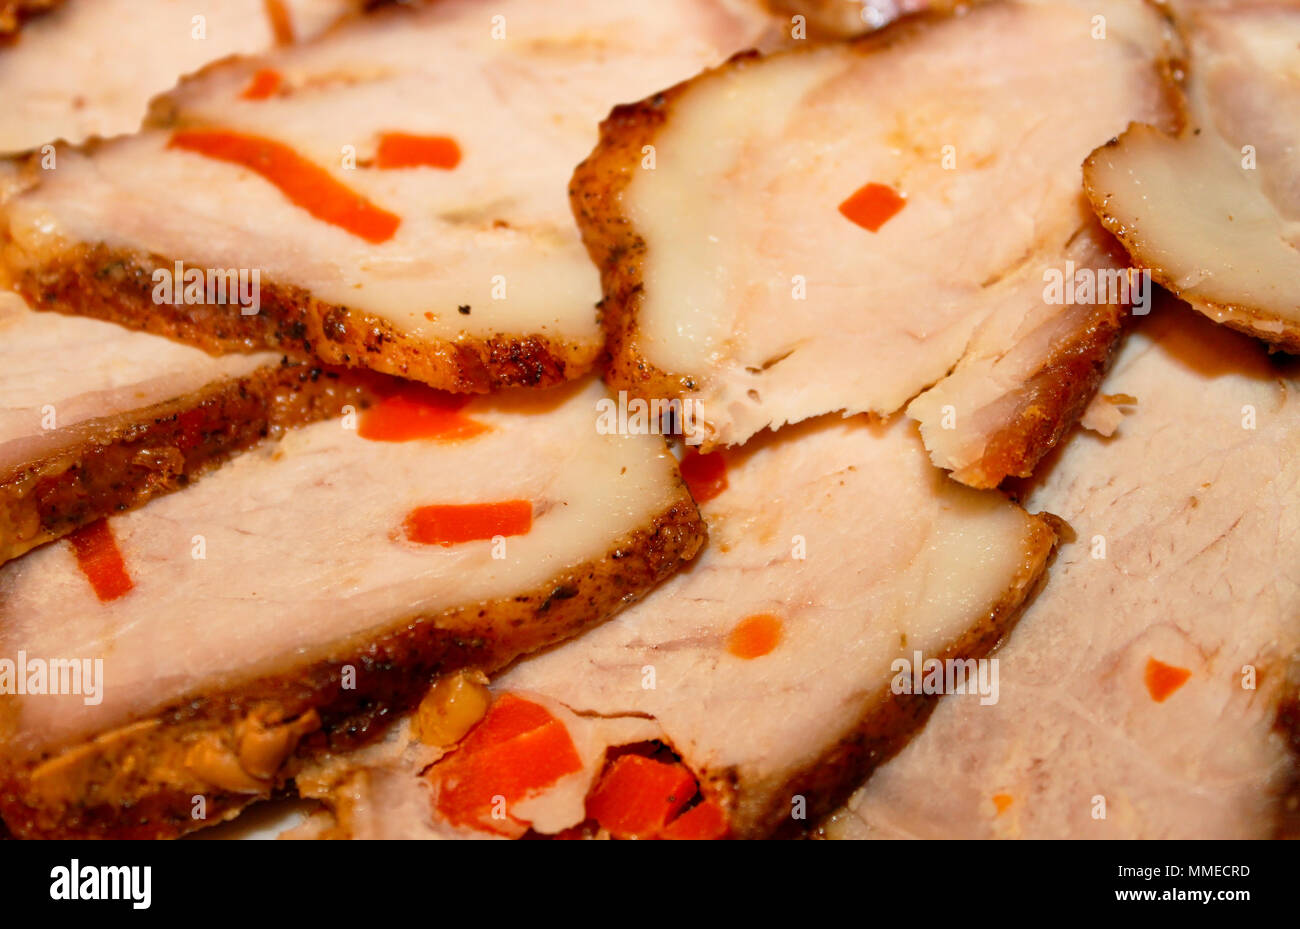 Sliced baked ham, stuffed with carrots and spiced spread out on a plate close up as background Stock Photo